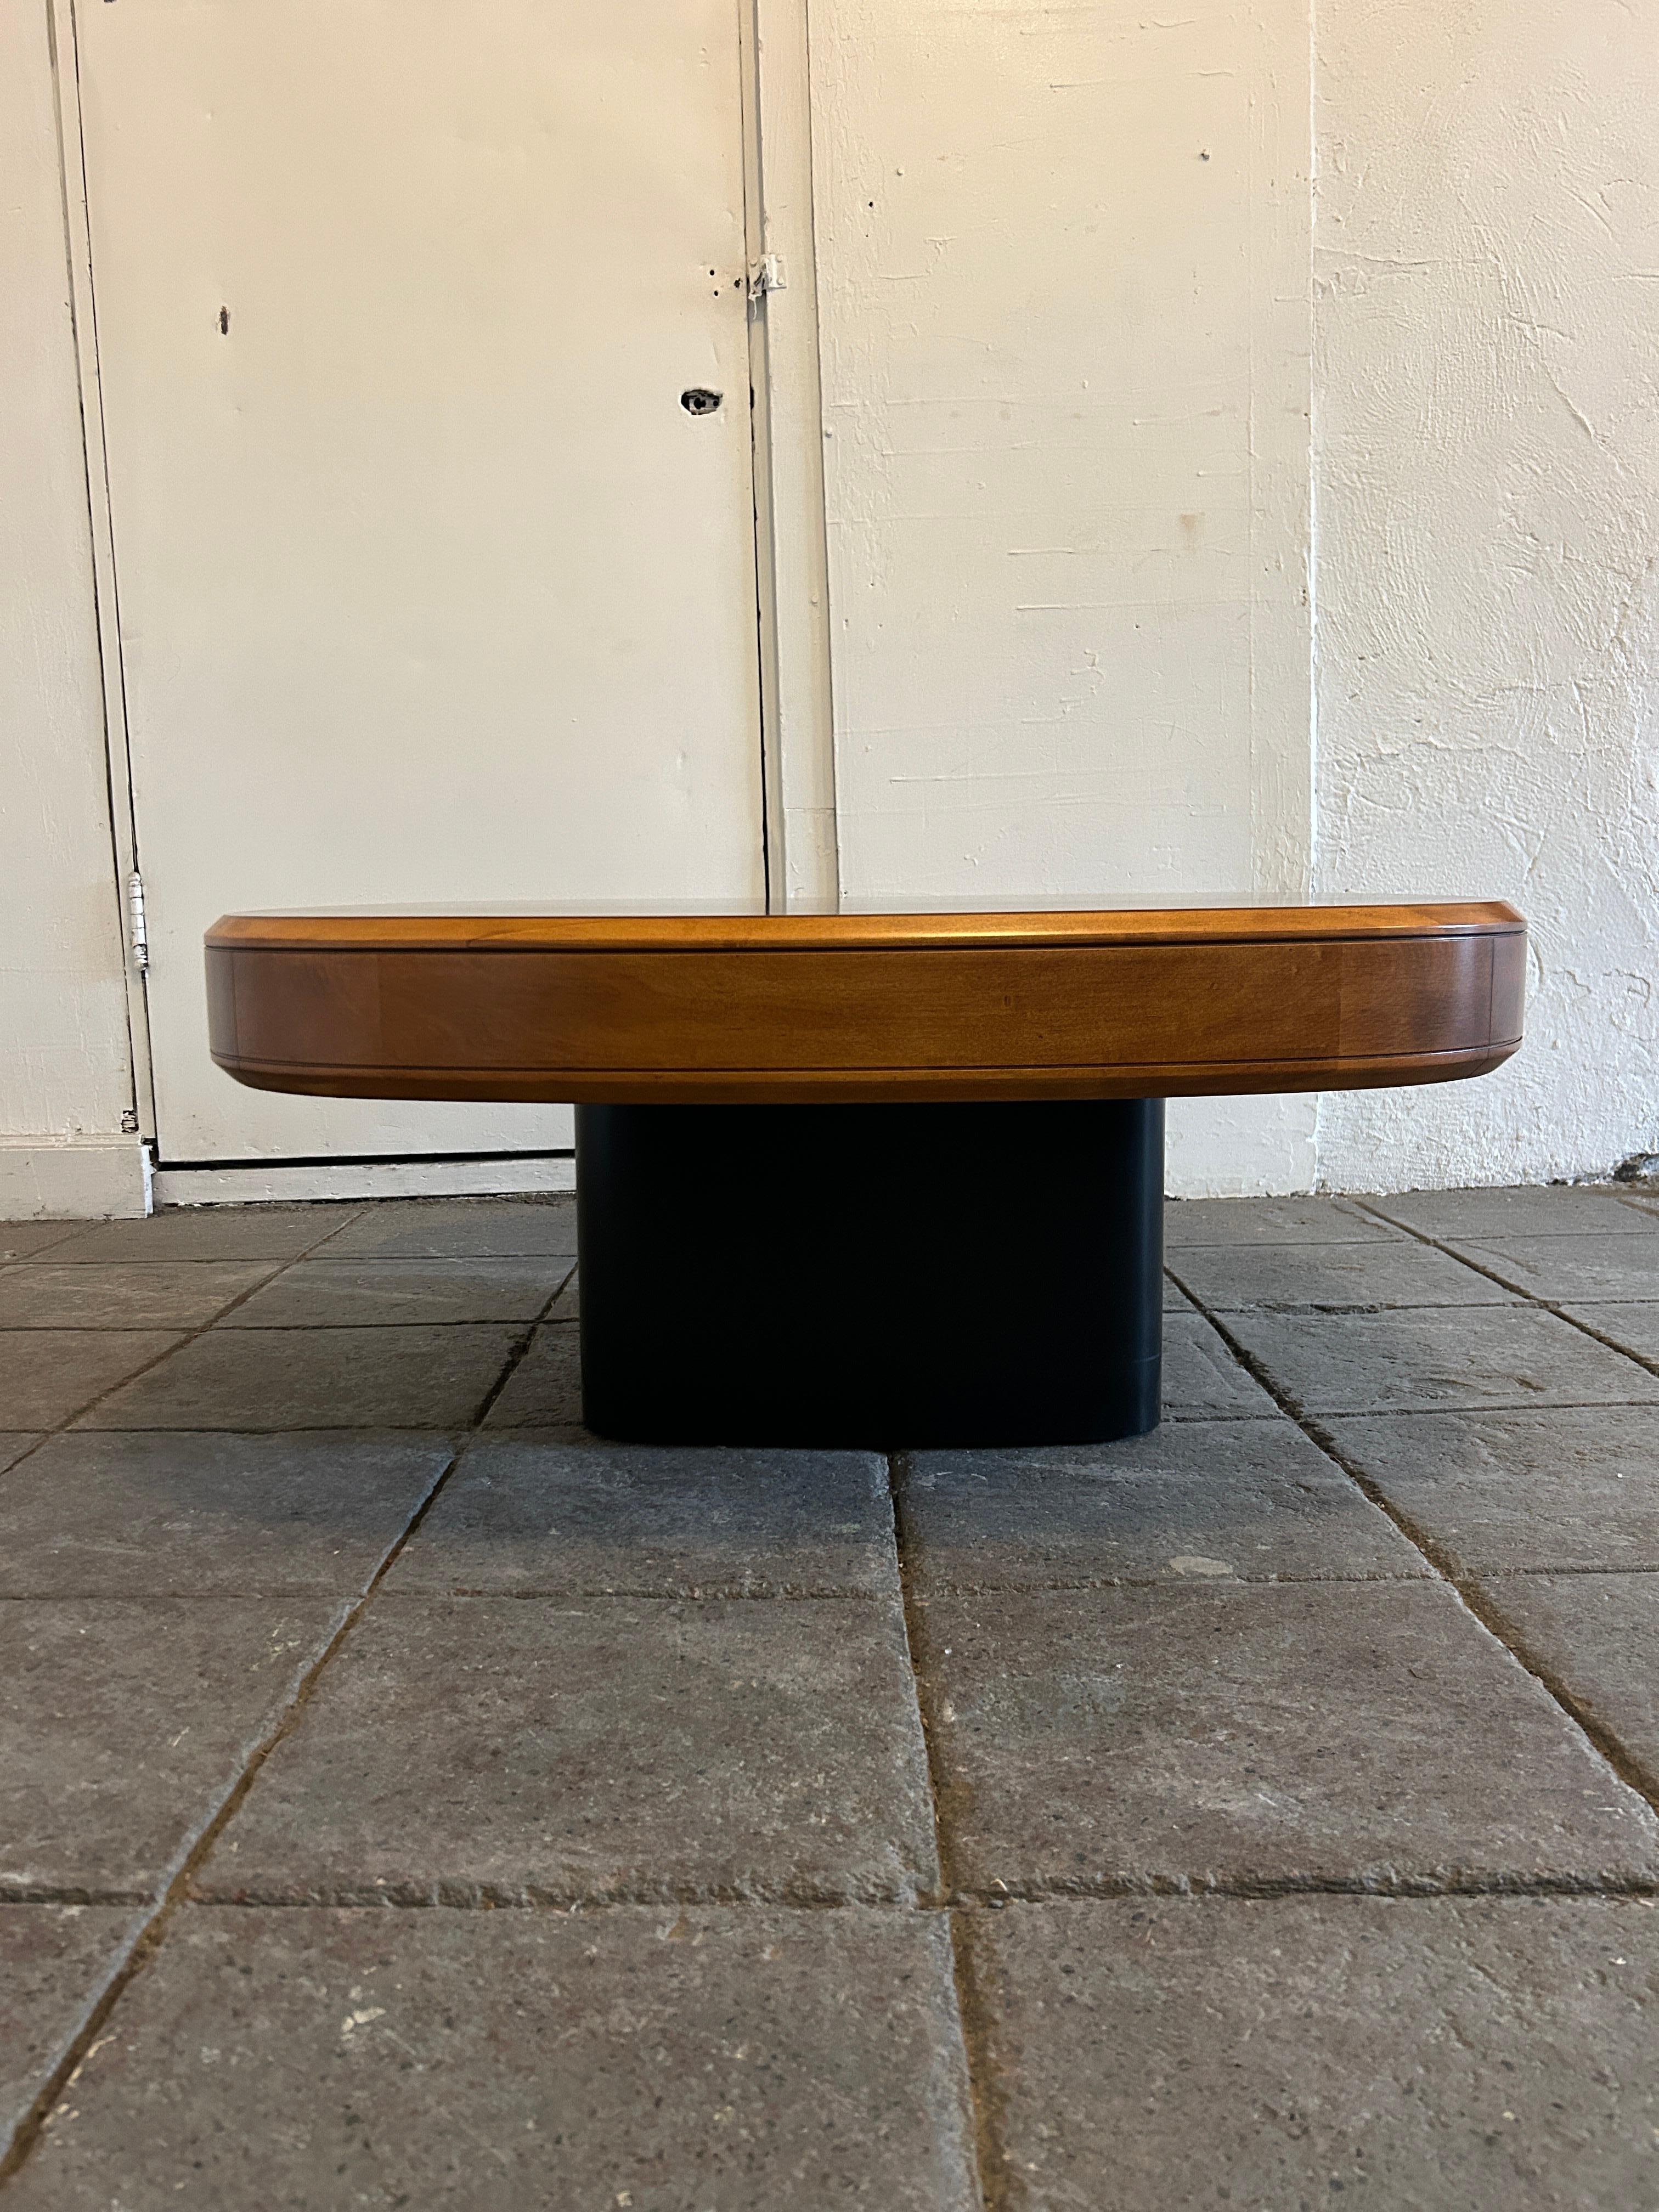 Mid century modern Exotic Rosewood round drum coffee table Milo Baughman. Beautiful coffee or cocktail table with stunning rosewood grain top with blonde wood apron that sits on a black lacquer square base. Made in USA located in Brooklyn NYC.